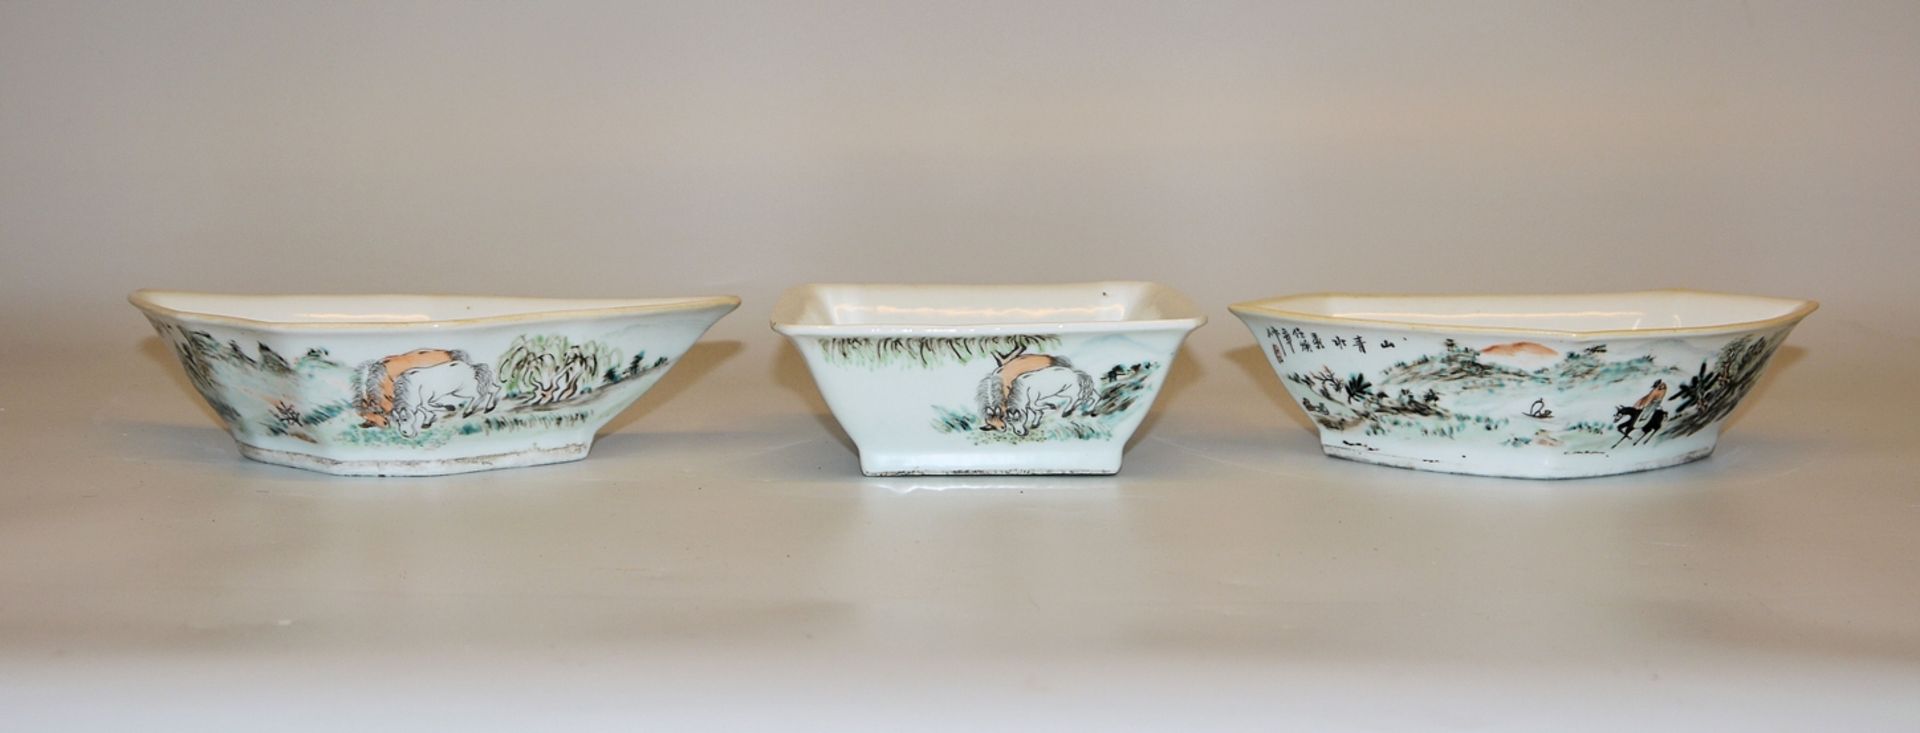 9-piece porcelain cabaret from the Republic period, China 1st half of the 20th century - Image 3 of 4